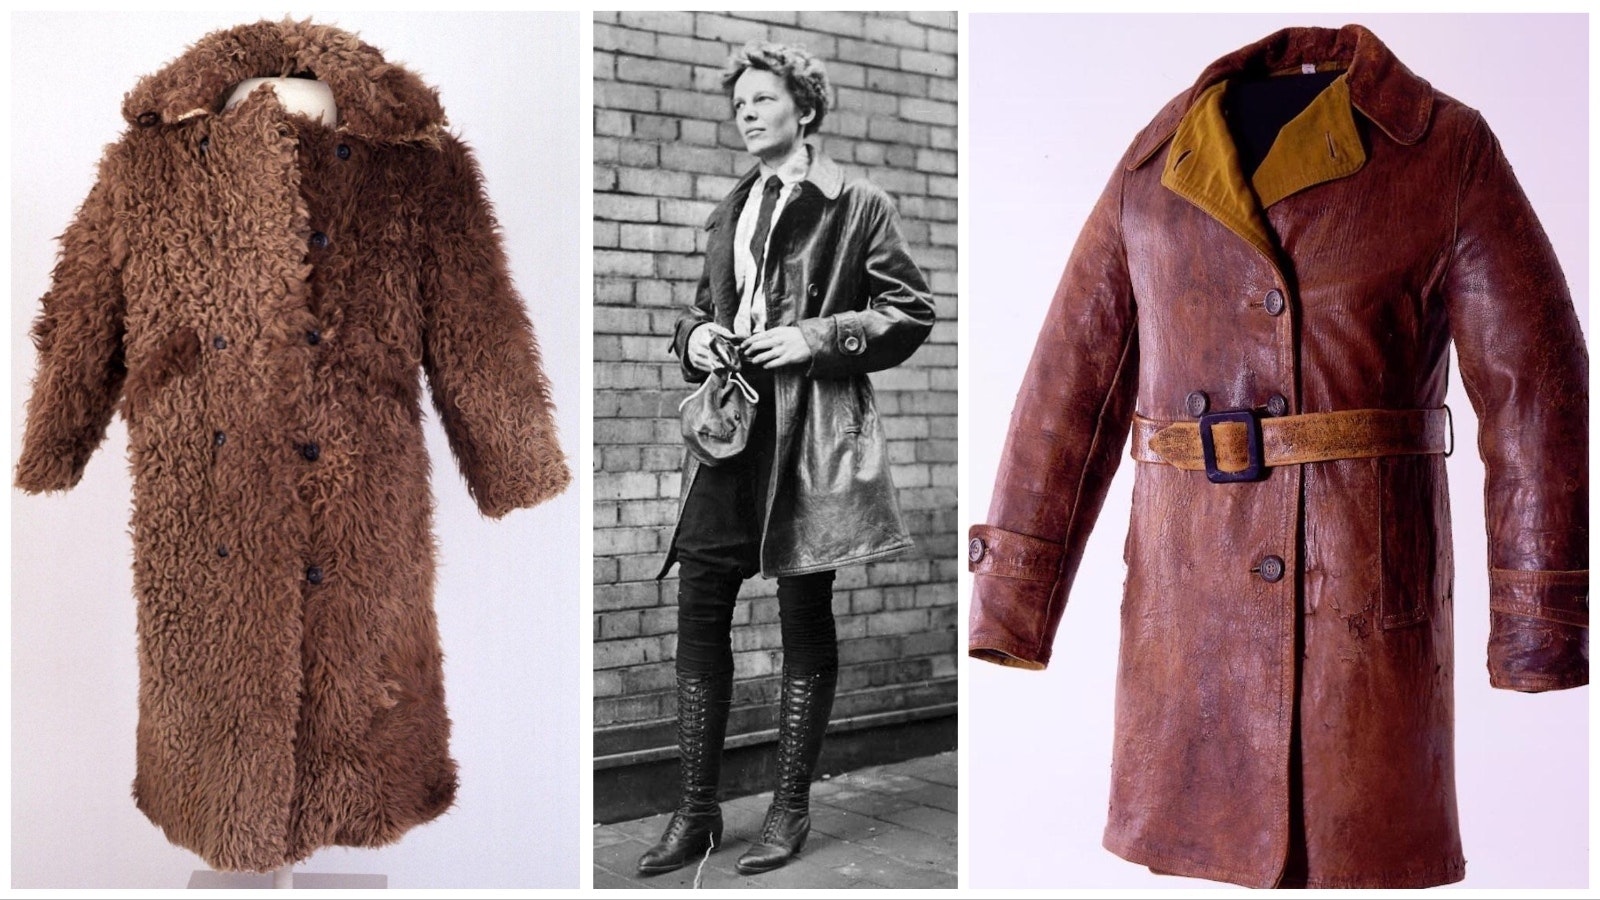 Amelia Earhart models her own line of fashion in Chicago 1928, center. At right is an aviator's coat given to her by Carl Dunrud. At left is a Buffalo coat, also a gift from Dunrud.